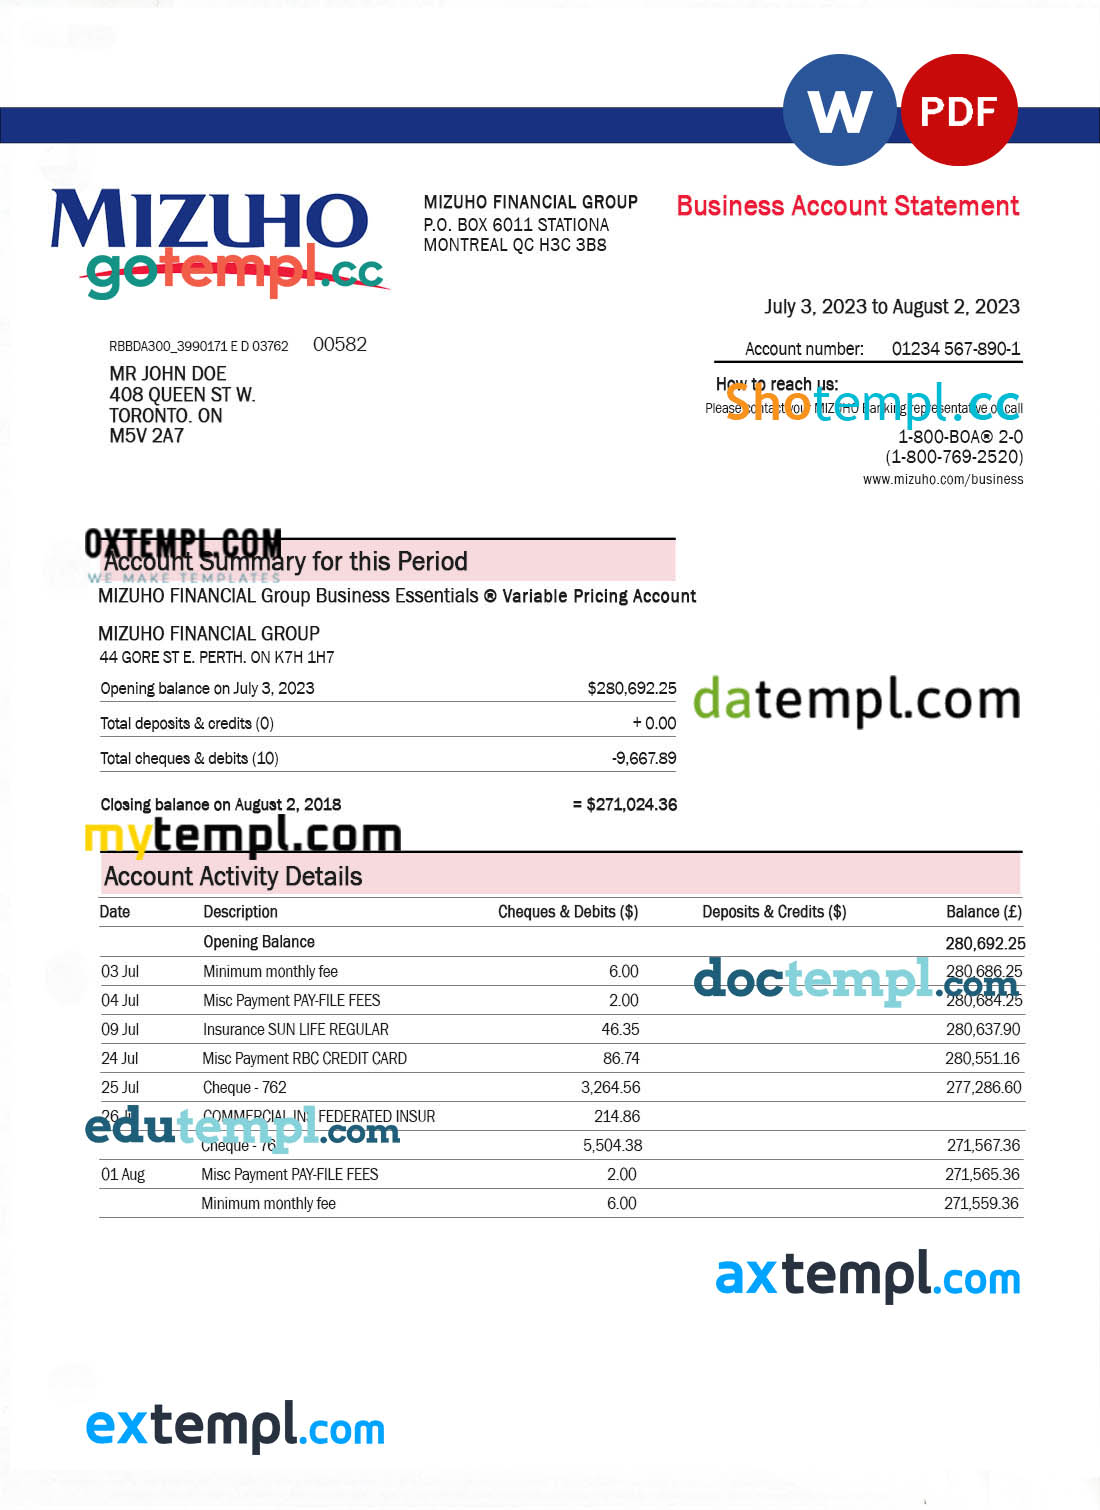 Mizuho Financial Group bank company account statement Word and PDF template